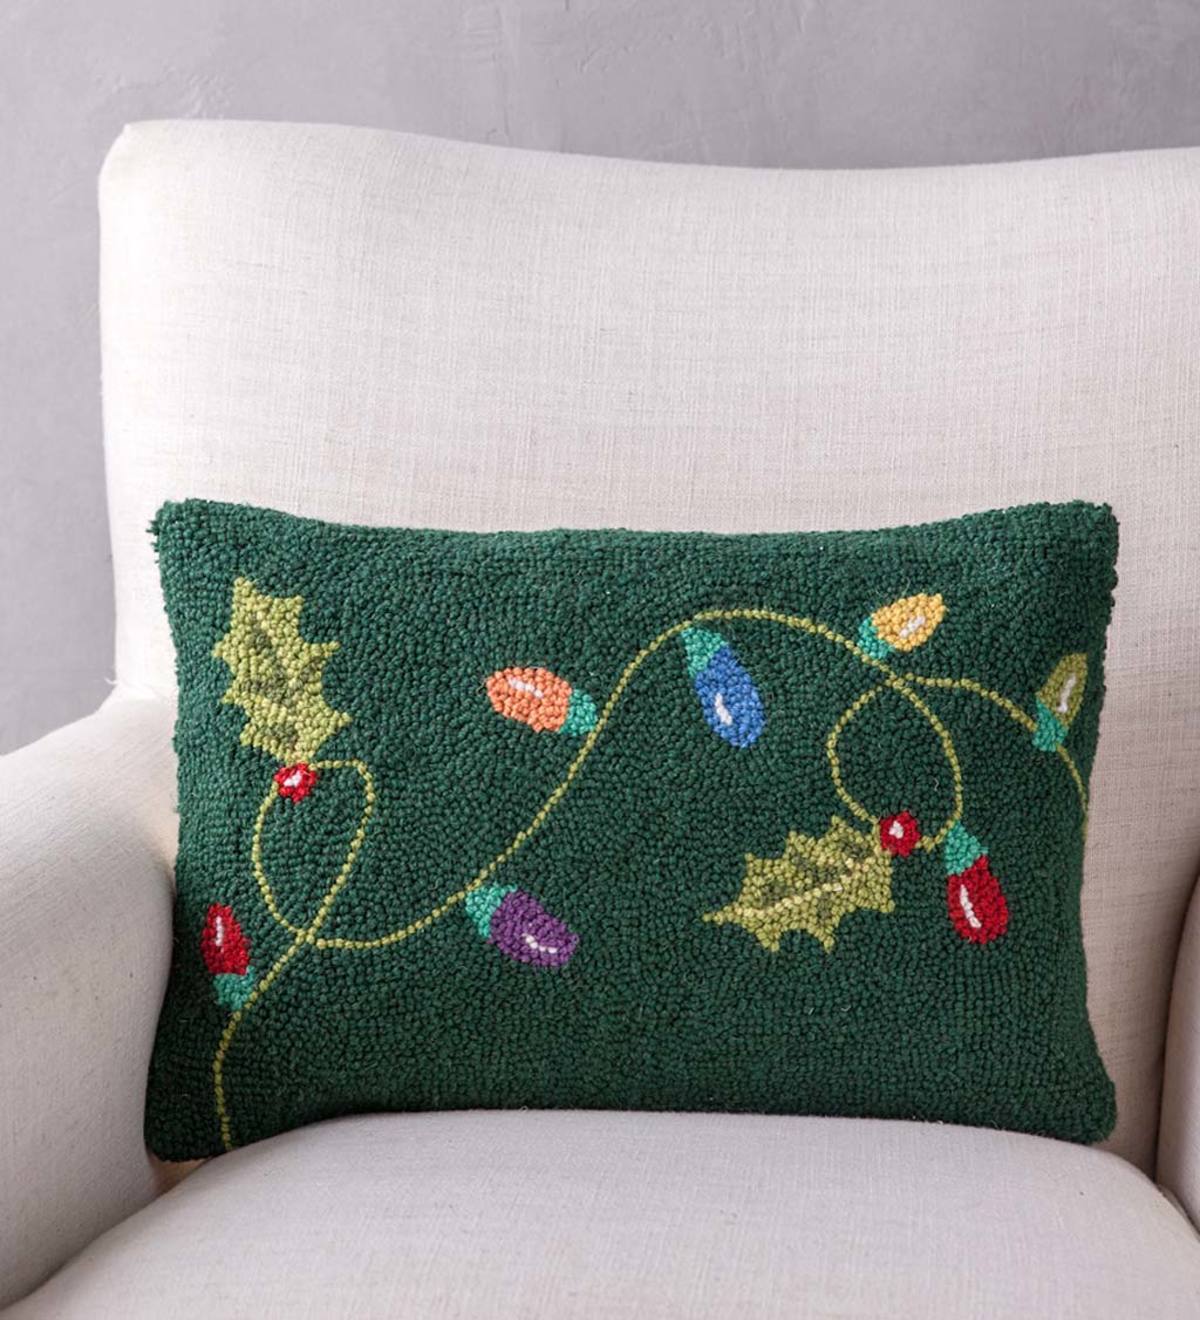 Hand-Hooked Wool String Lights Pillow